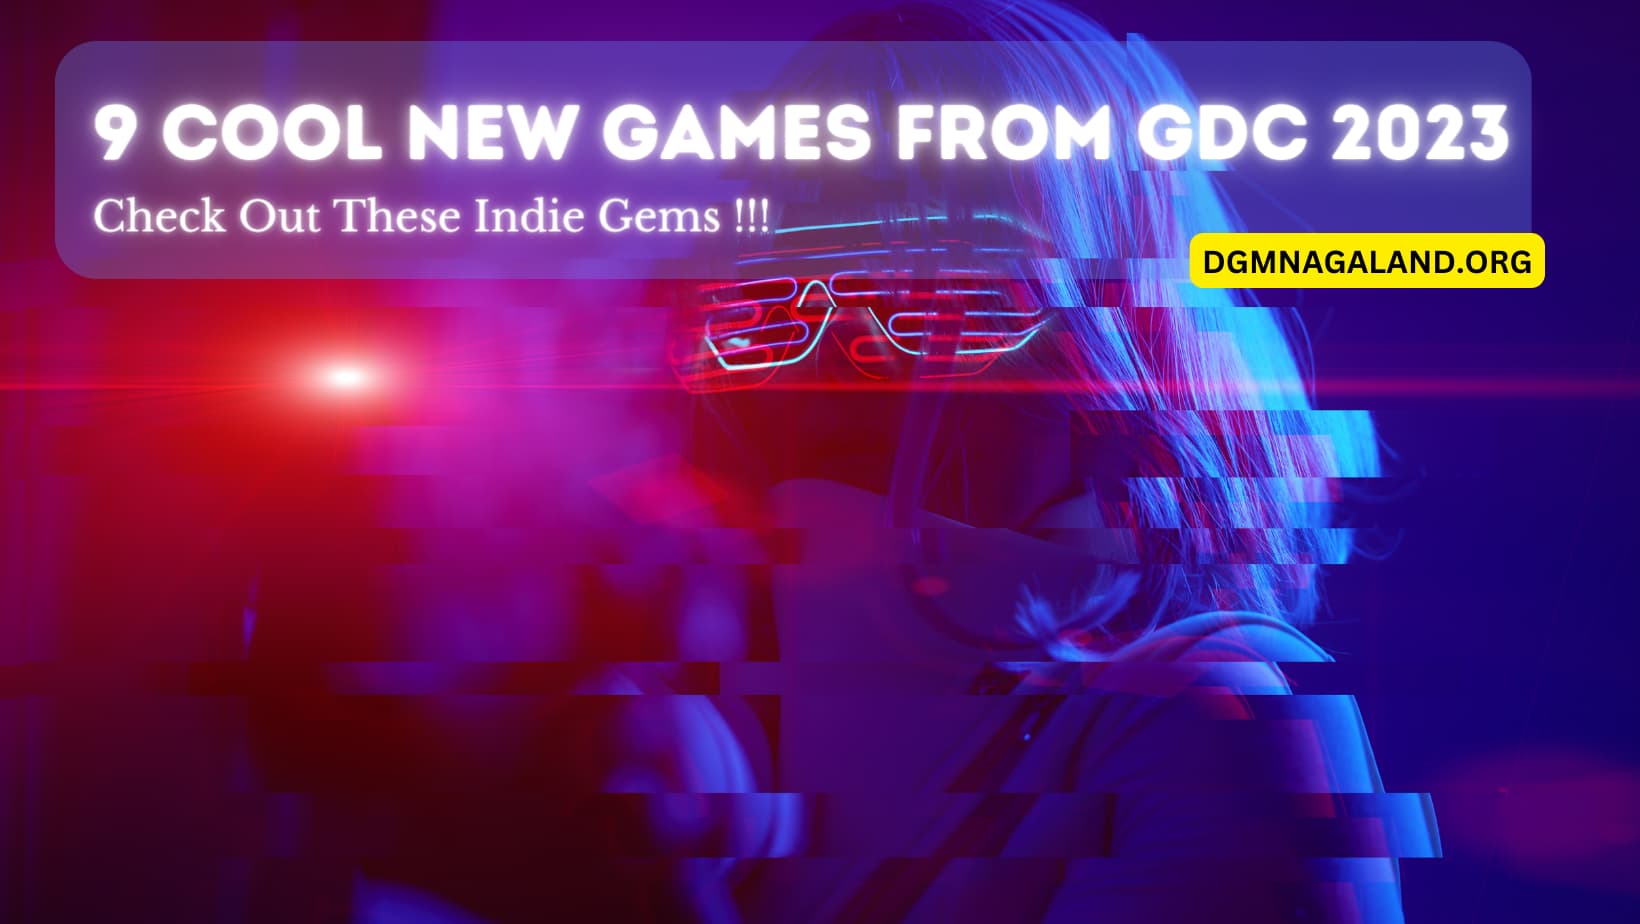 Check Out These Indie Gems